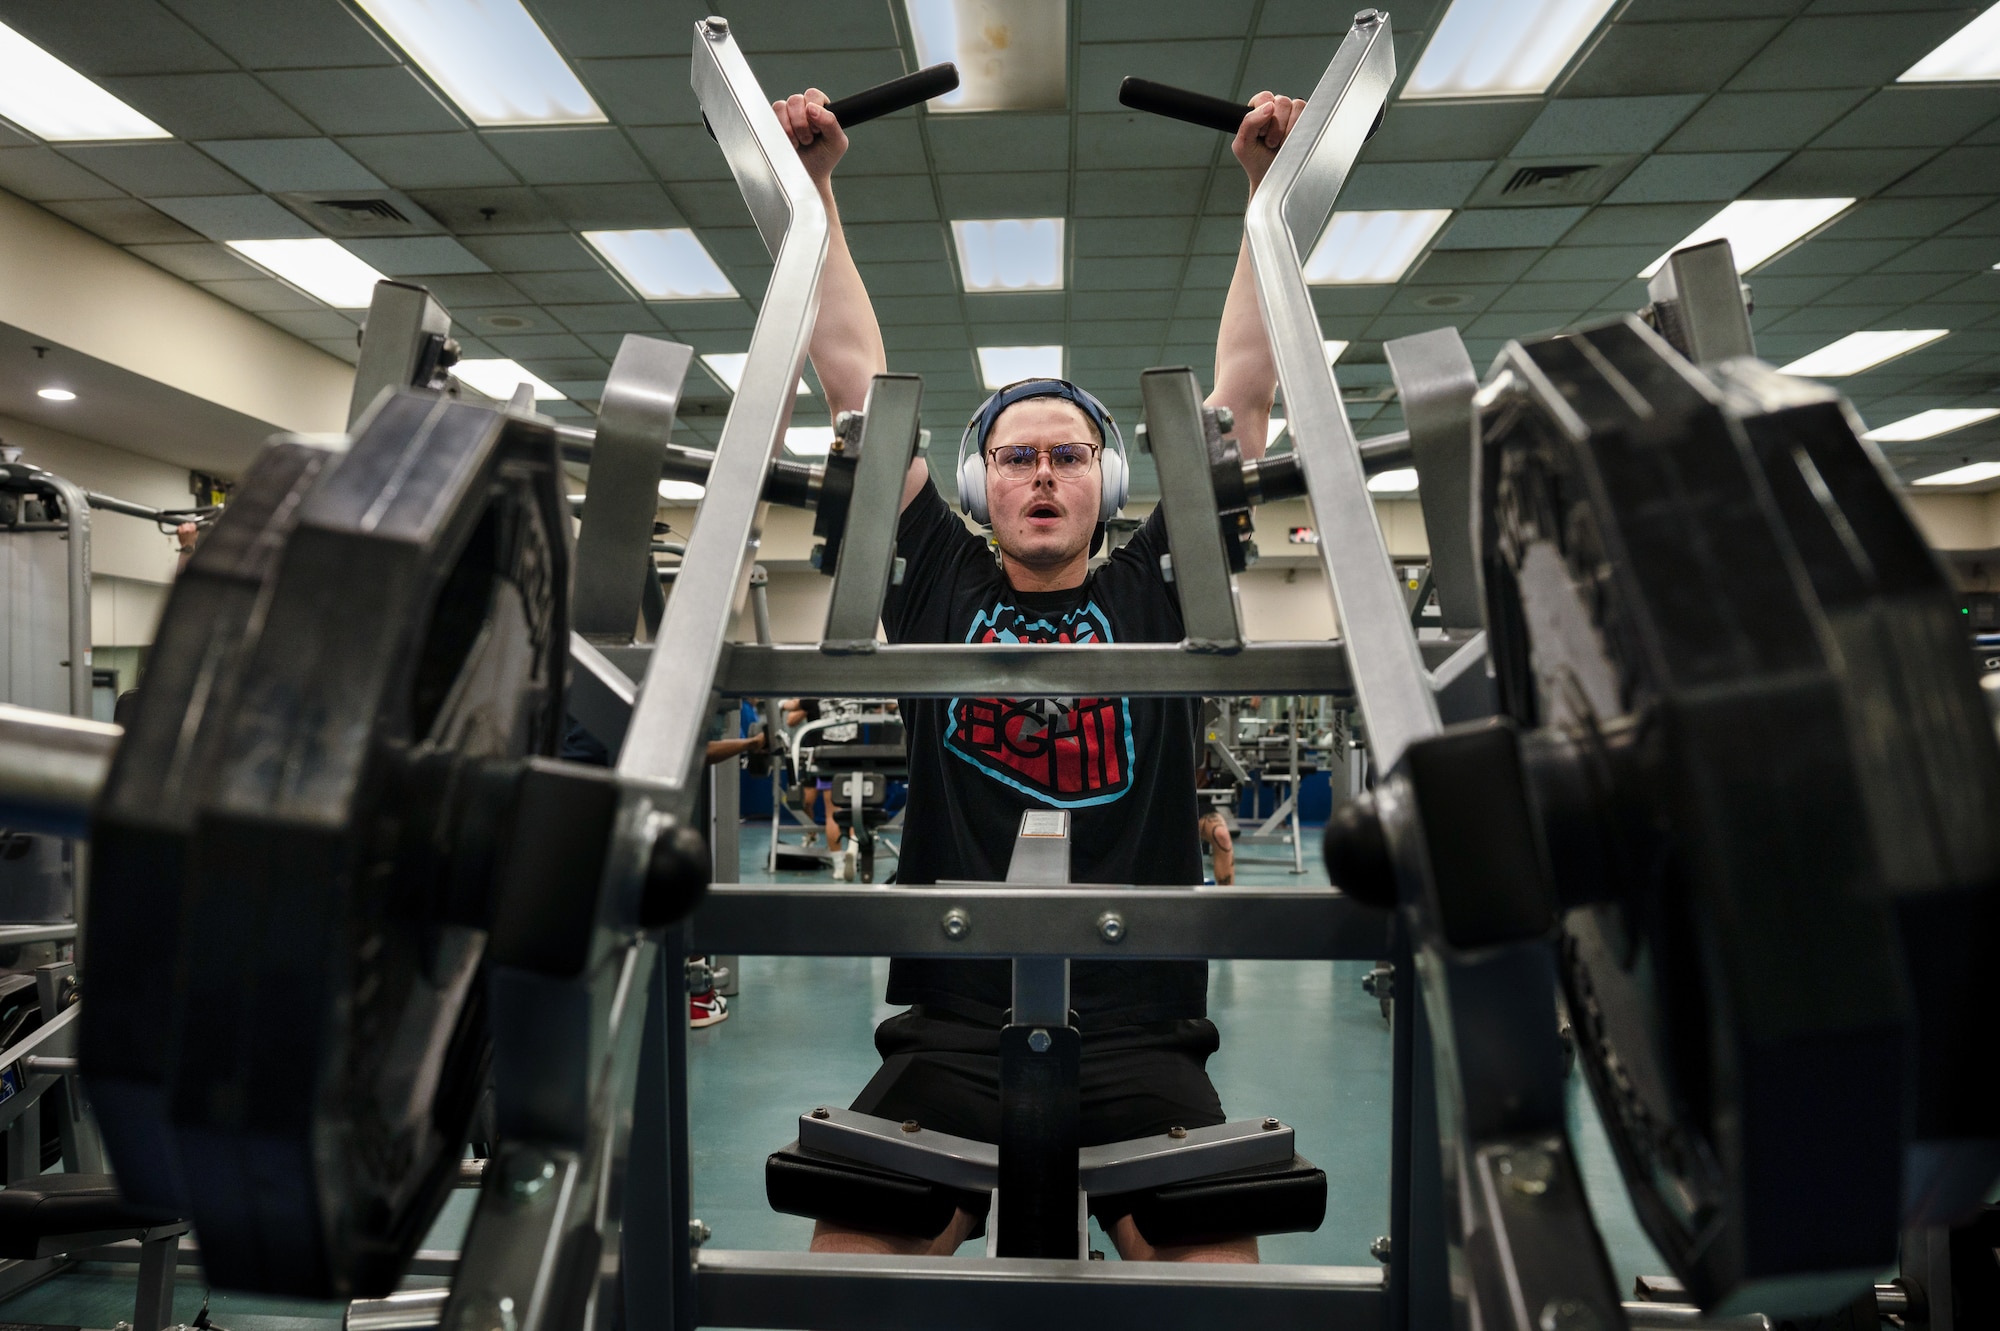 U.S. Air Force Airman 1st Class Aaron Edwards, 51st Fighter Wing public affairs specialist performs lateral pull-downs during a back and bicep workout at the fitness center on Osan Air Base, Republic of Korea, Dec. 30, 2022. The 51st Force Support Squadron fitness center is accessible 24/7 with manned hours Monday through Friday 5 a.m. through 10 p.m. and Saturdays 8 a.m. through 5 p.m. The center is also open during unmanned hours including Sundays, holidays and down days. (U.S. Air Force Photo by Staff Sgt. Dwane Young)